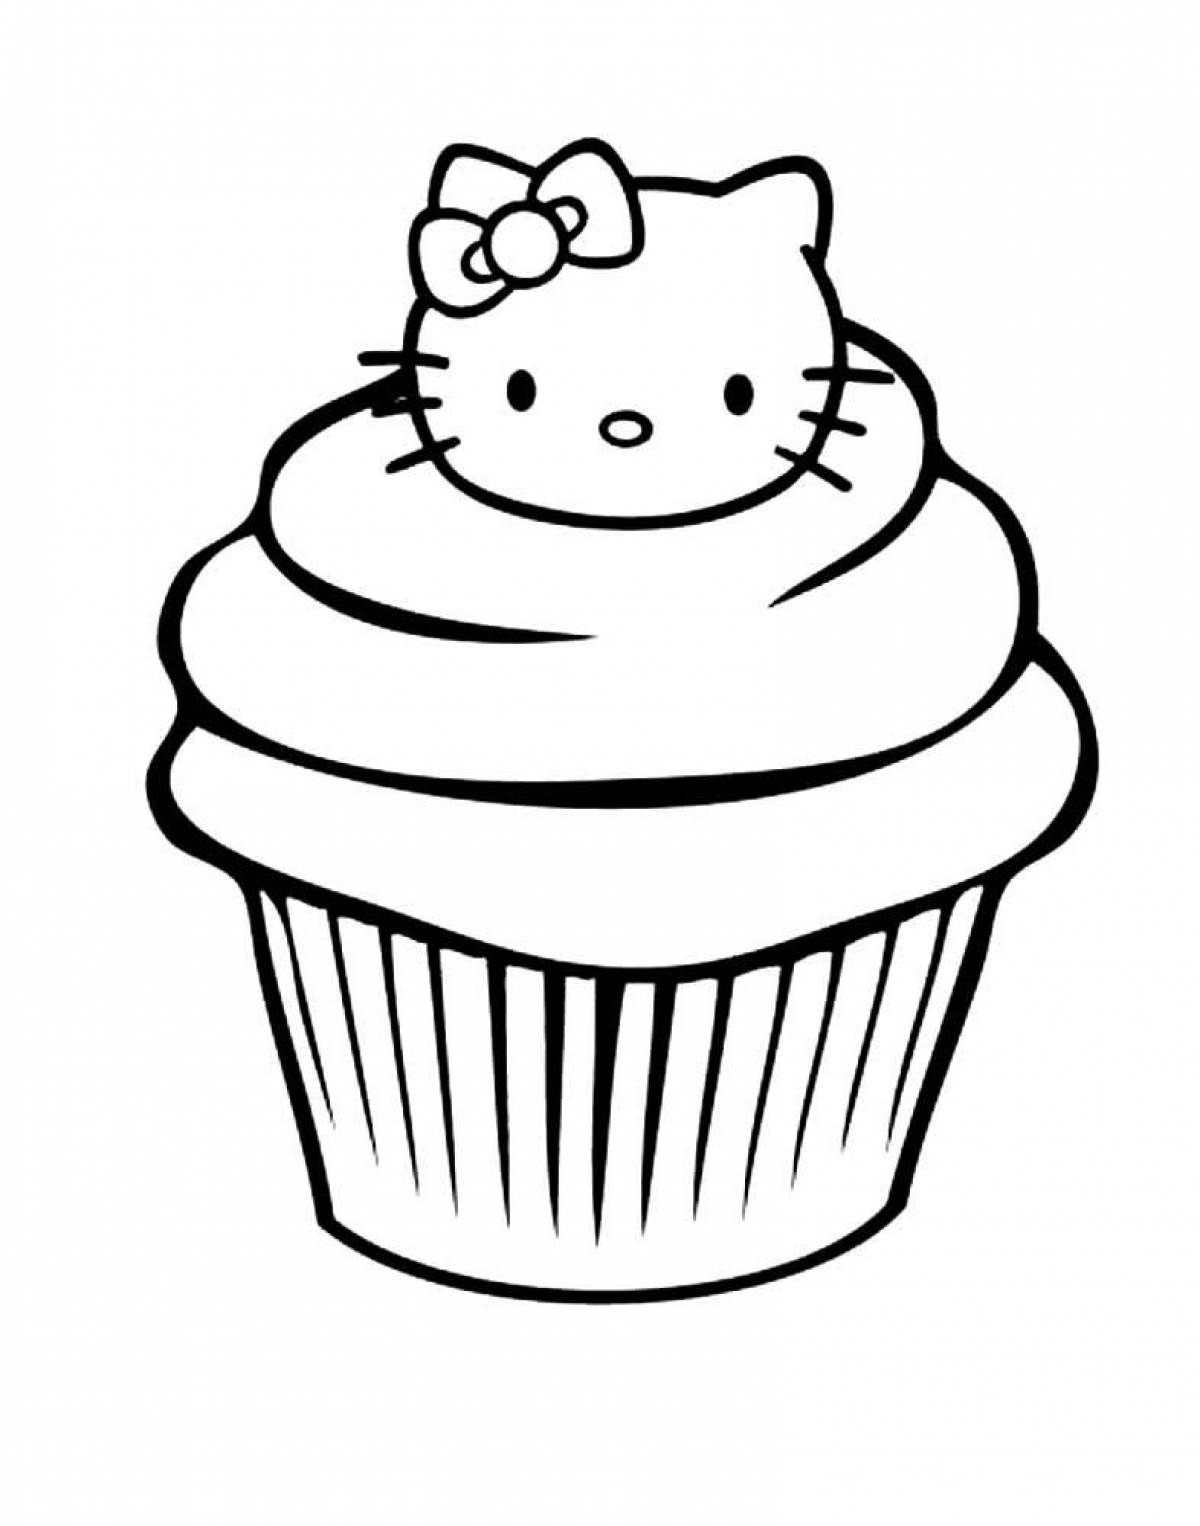 Coloring page happy cupcake